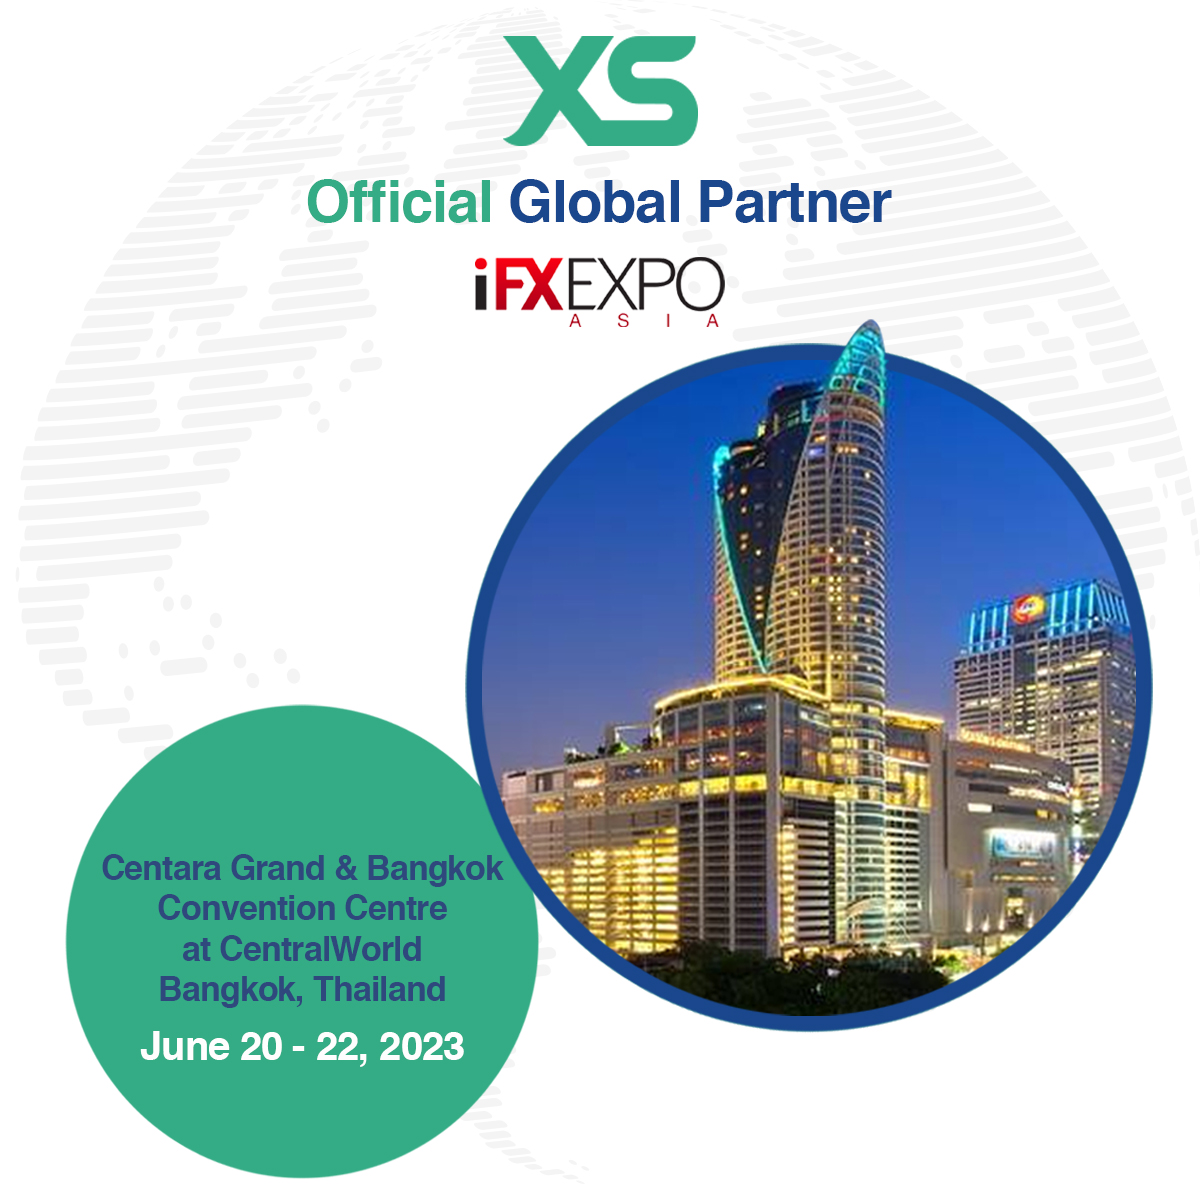 Multi-Asset Broker XS.com becomes the Official Global Partner of iFXExpo Asia